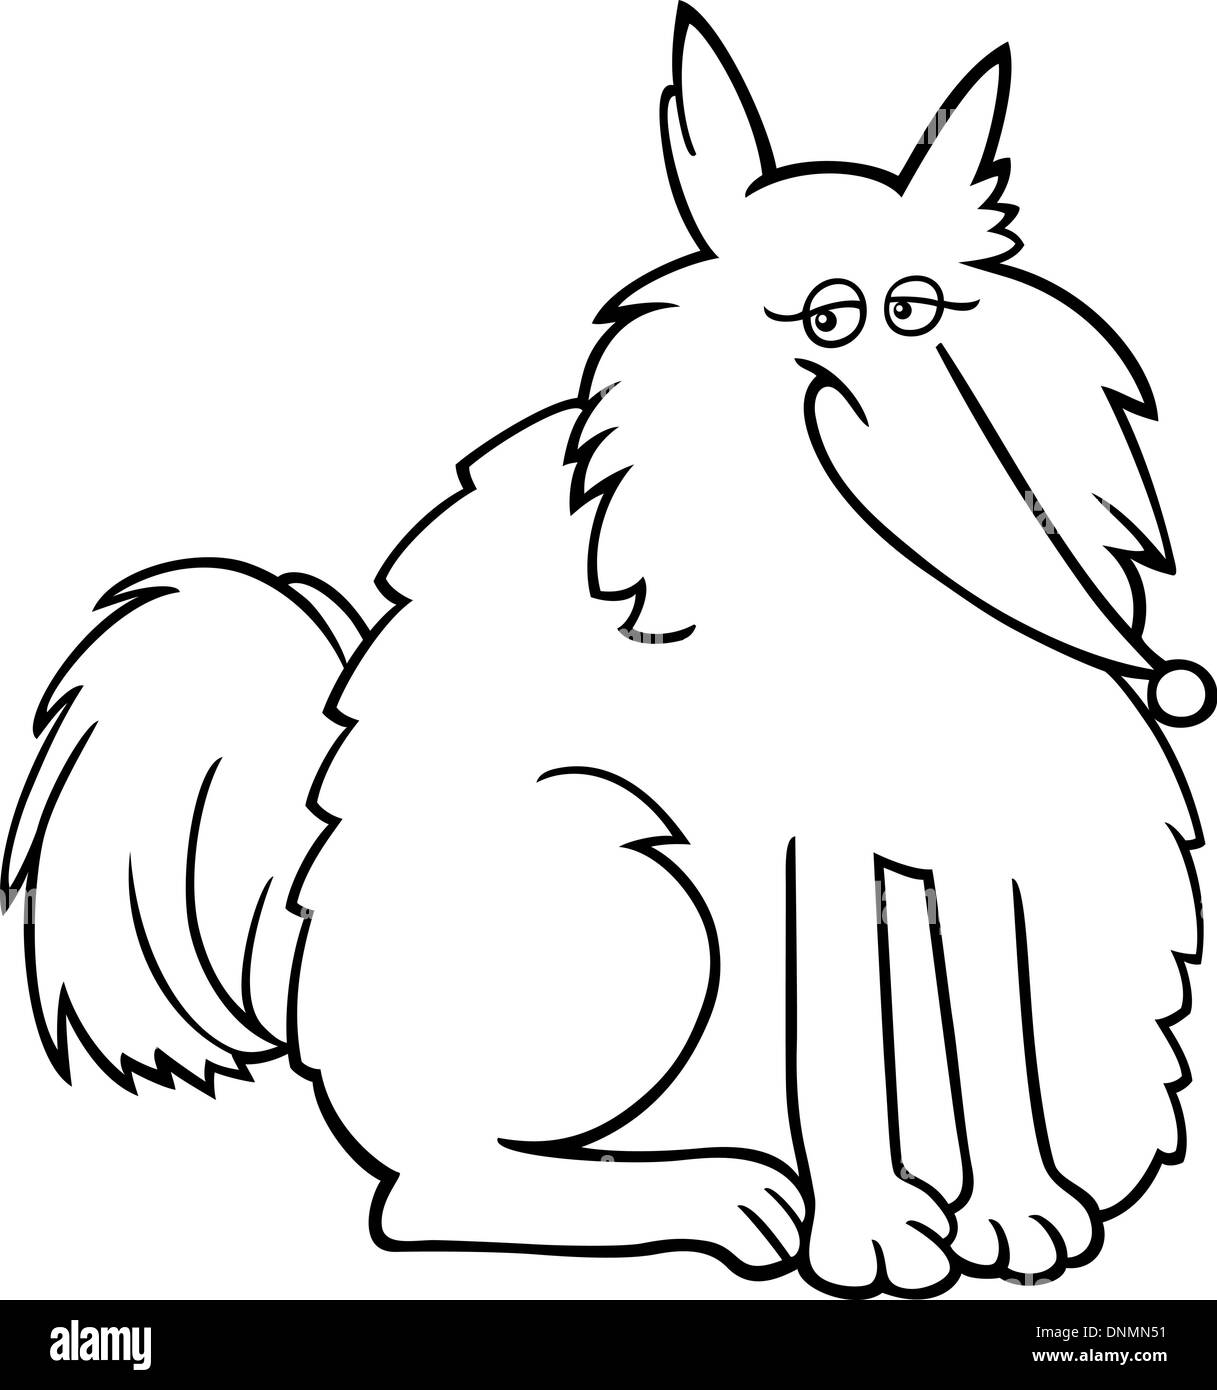 Cartoon Illustration of Funny Purebred Eskimo Dog or Spitz for Coloring Book Stock Vector